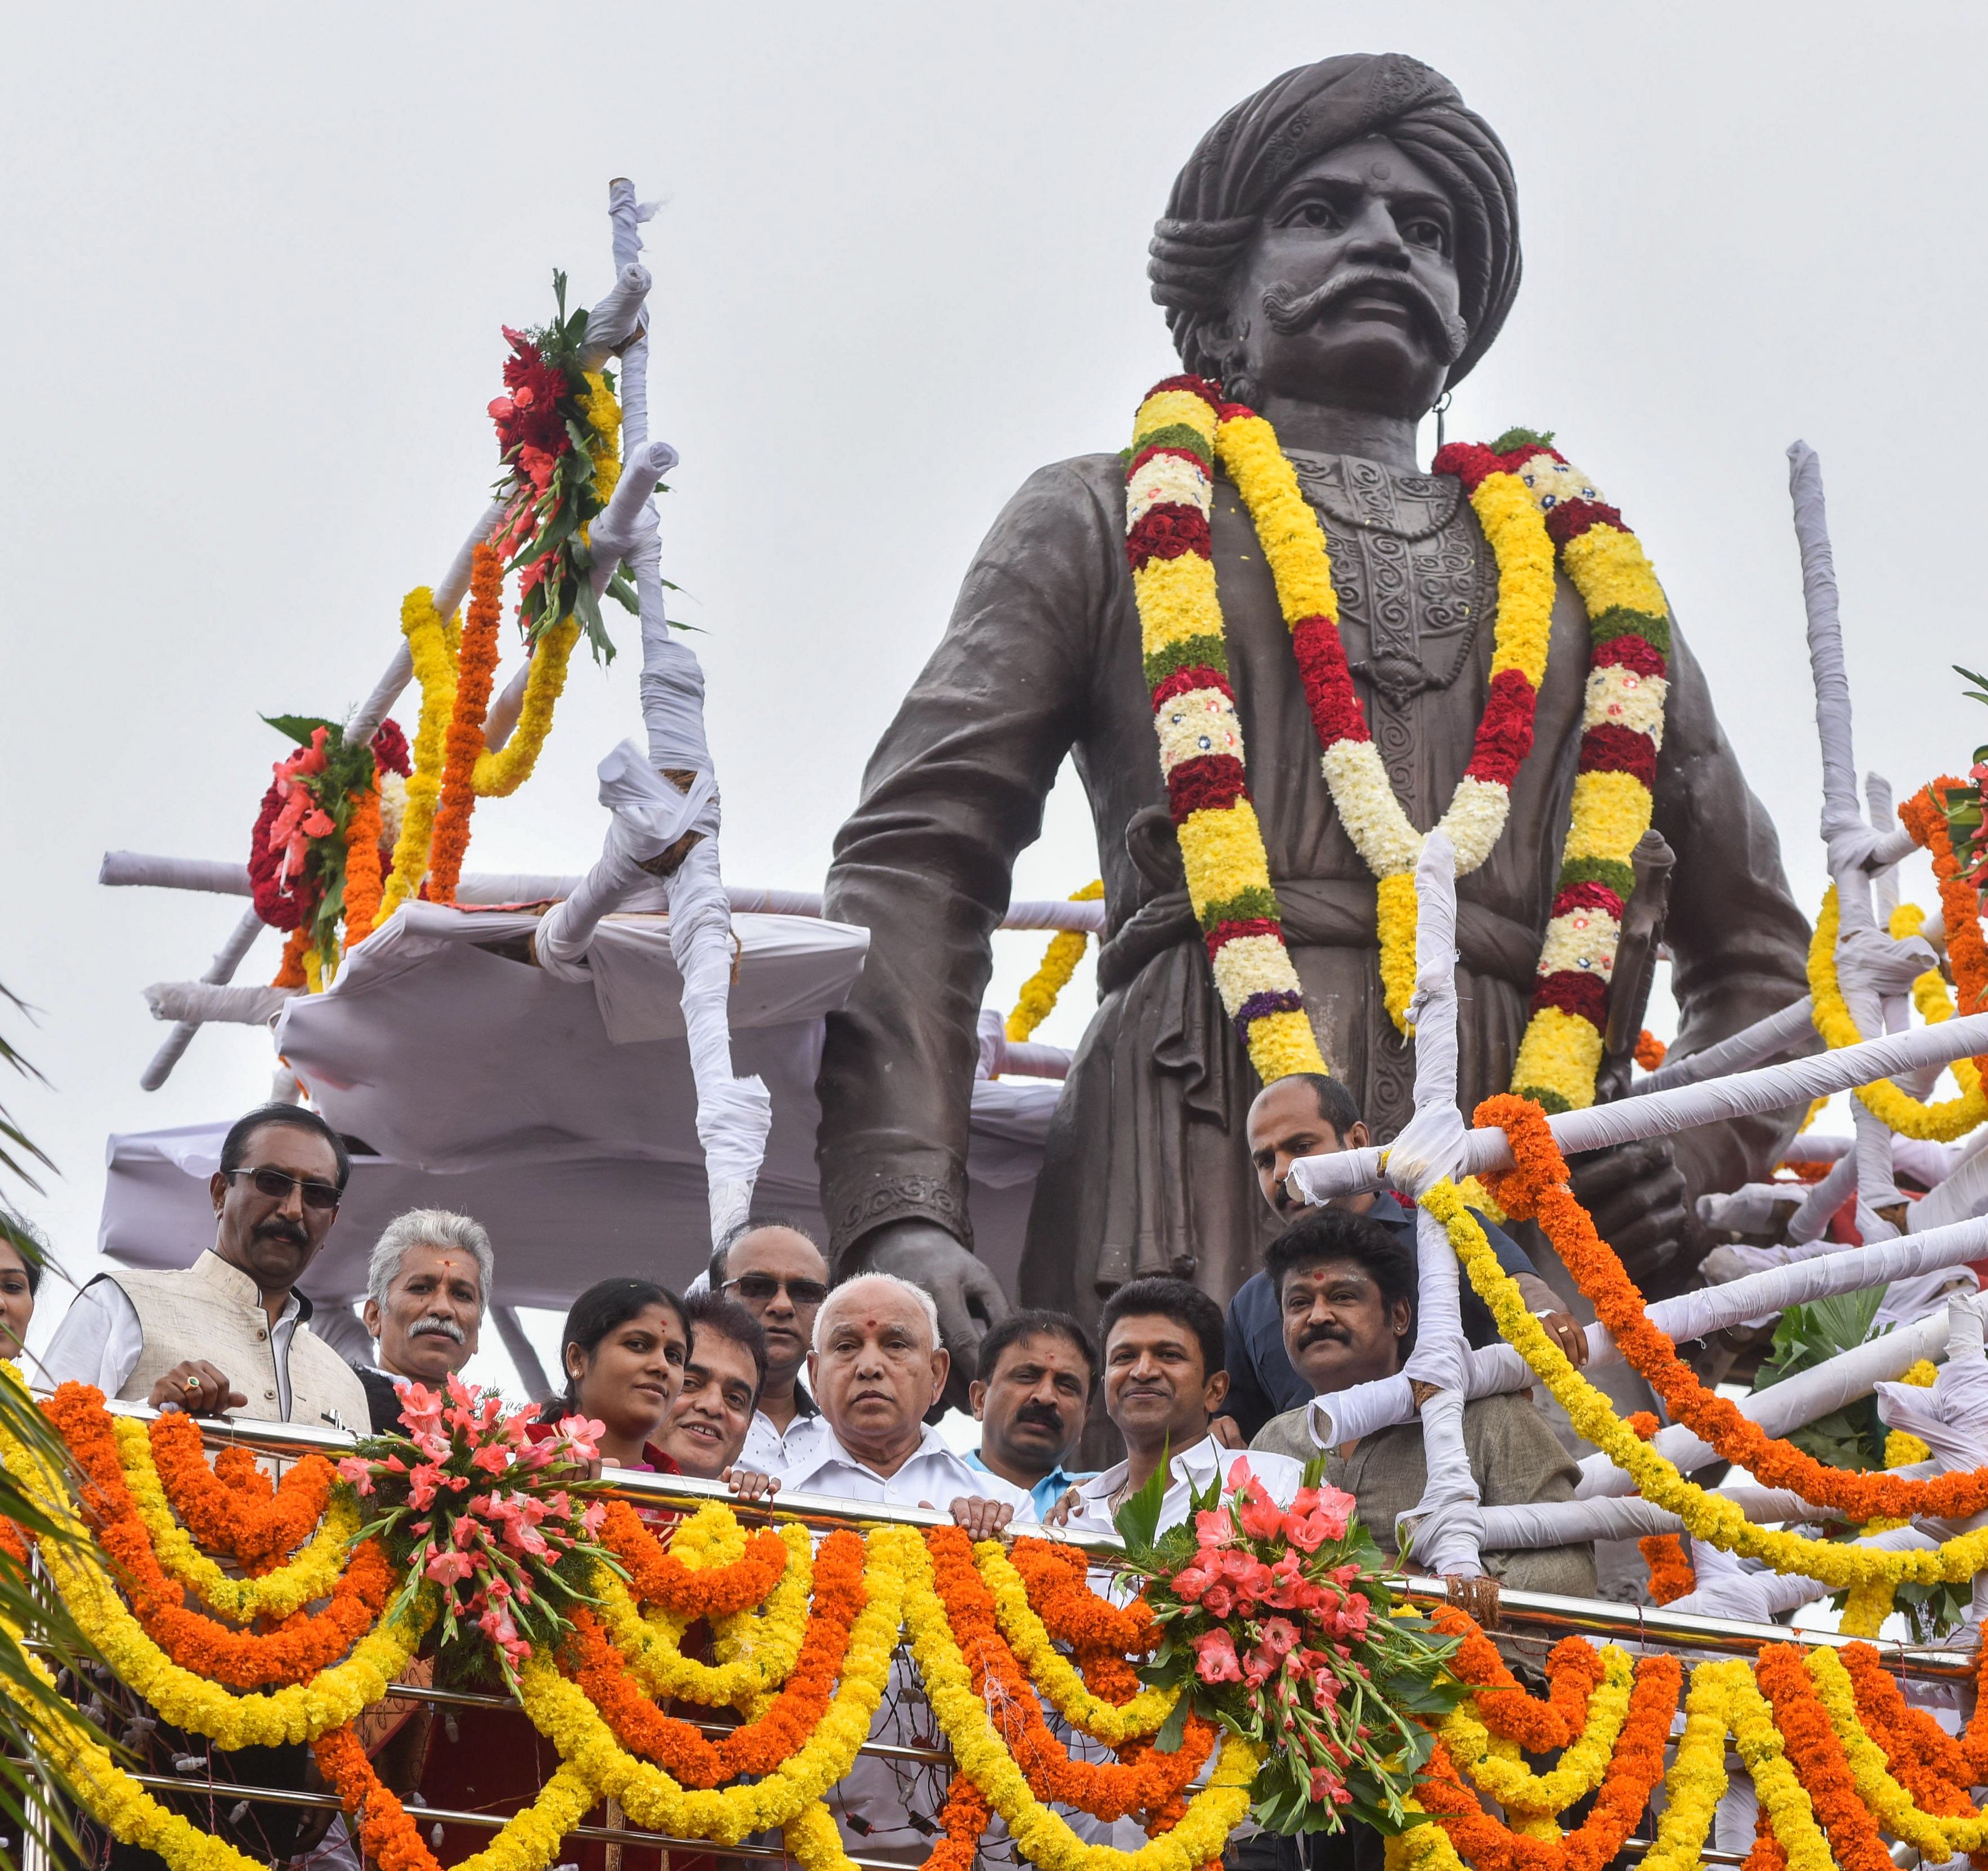 A Nadaprabhu Kempegowda statue is seen as part of Kempegowda Day celebrations at Mekhri circle in Bengaluru (image for representation only). Credit: DH Photo